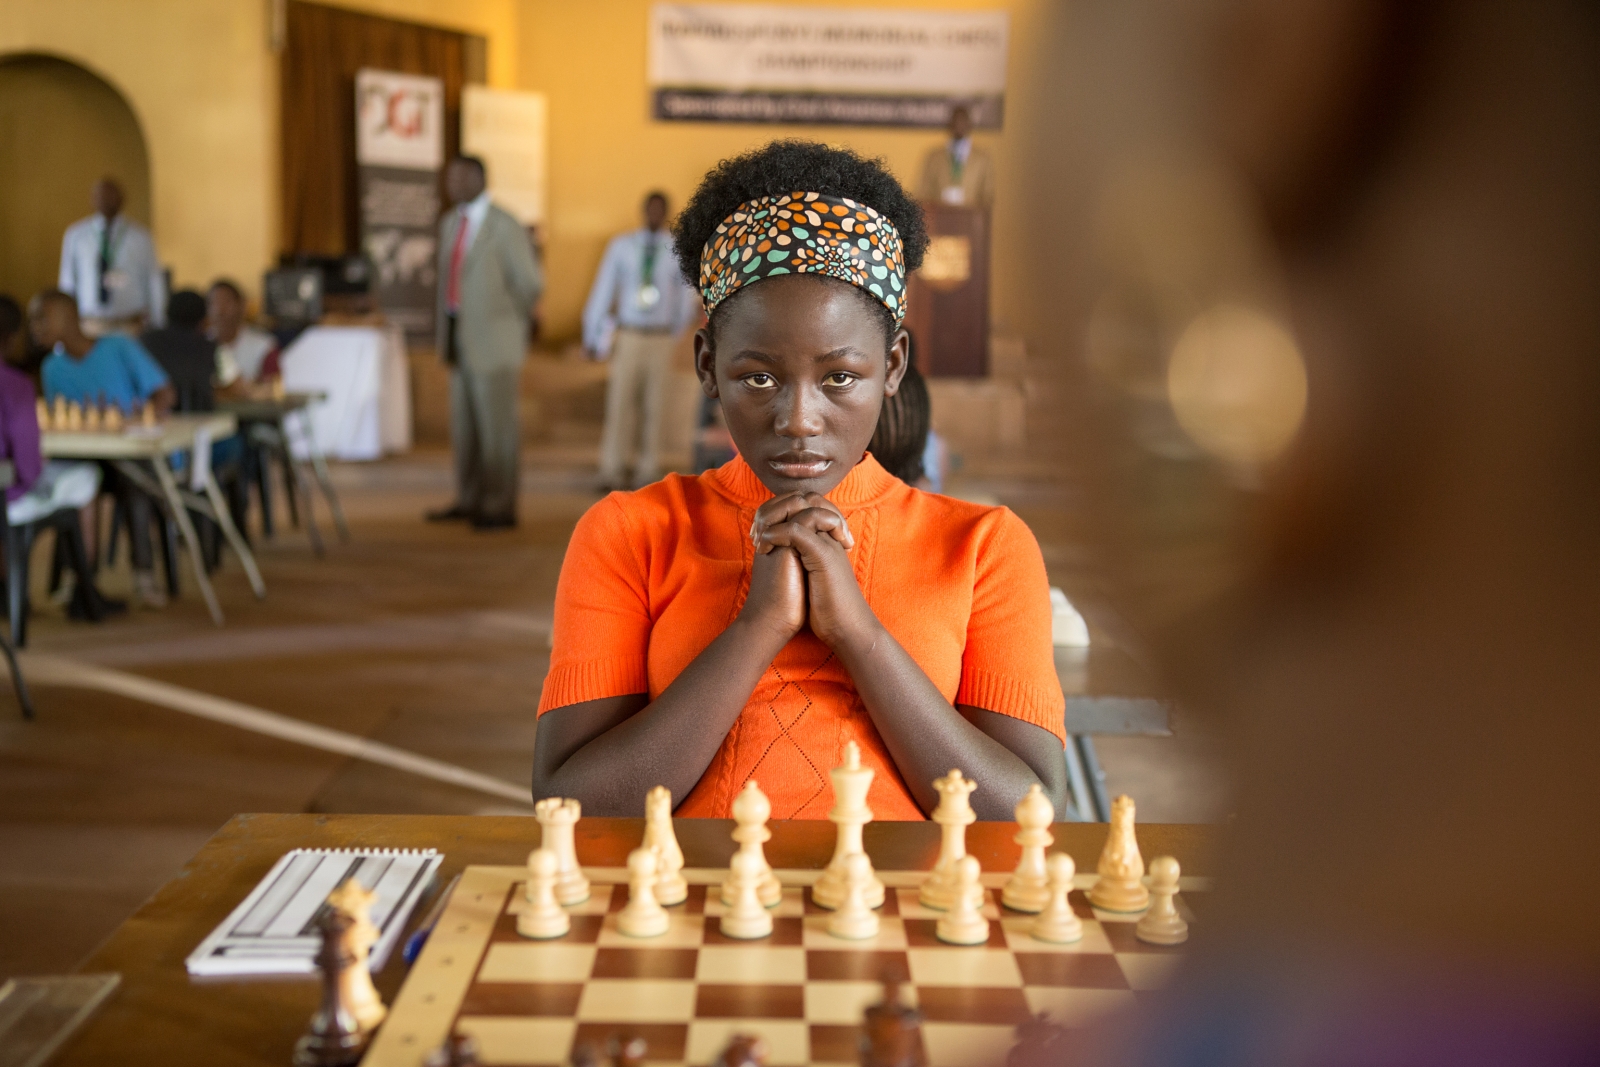 queen of katwe movie times